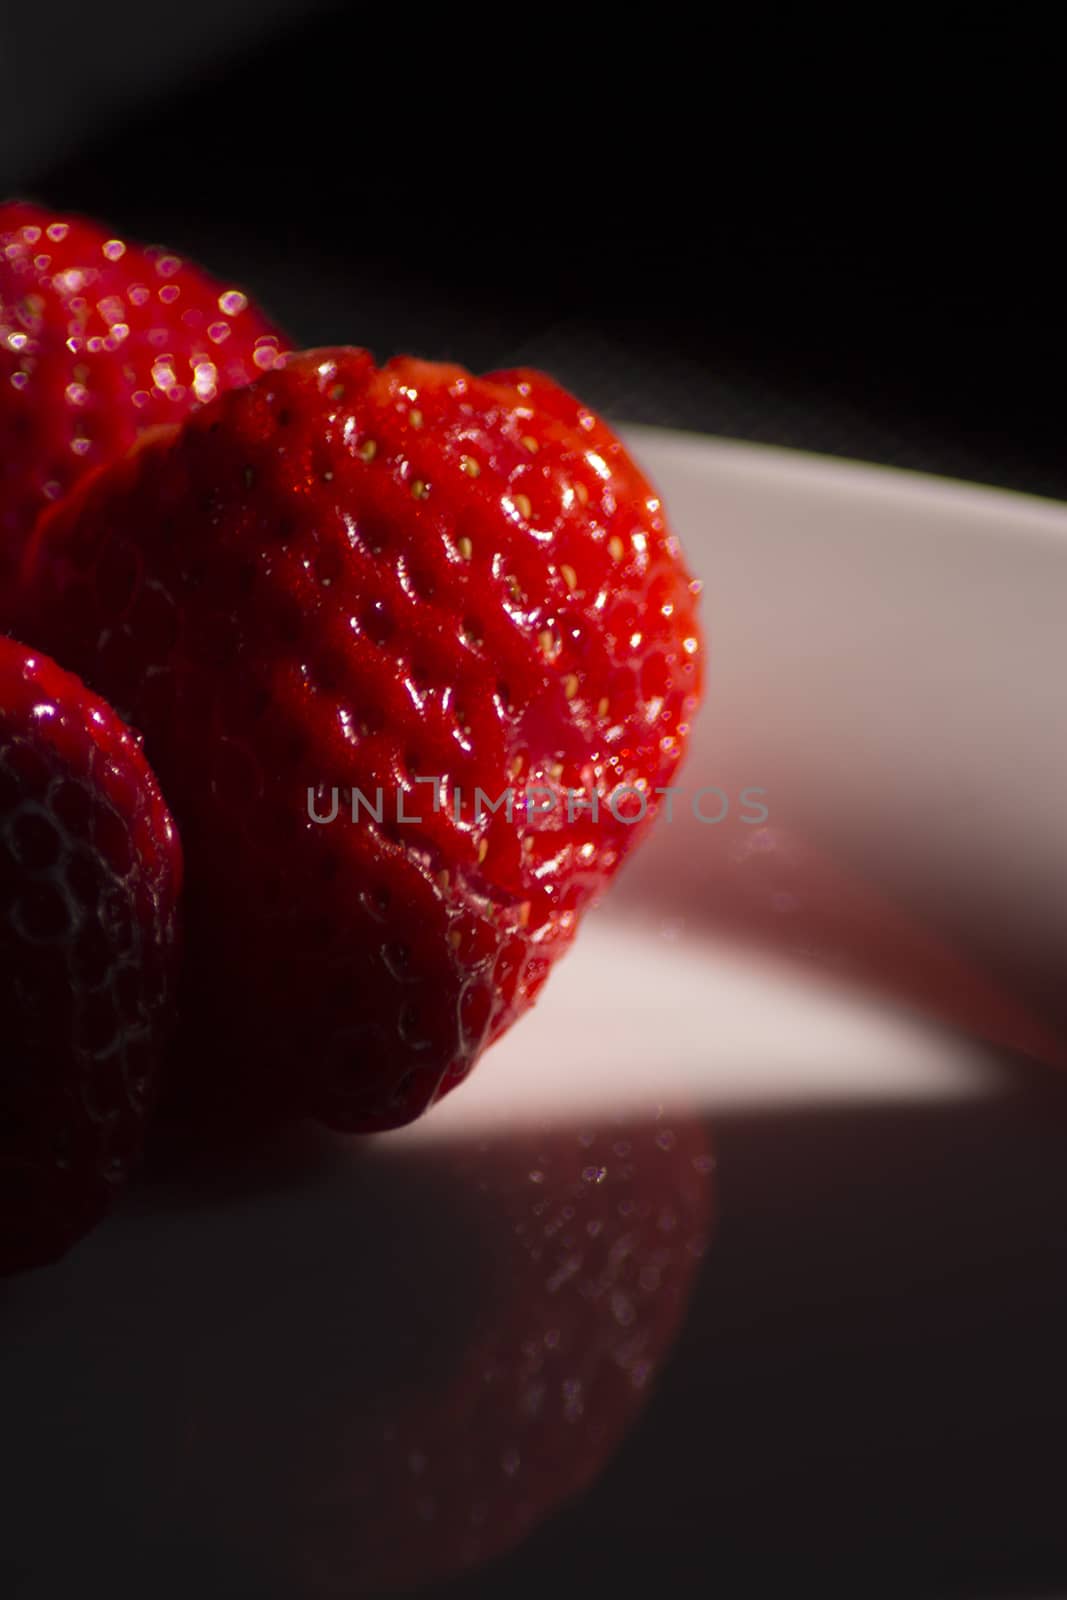 Strawberries on black background. Bright deep red.